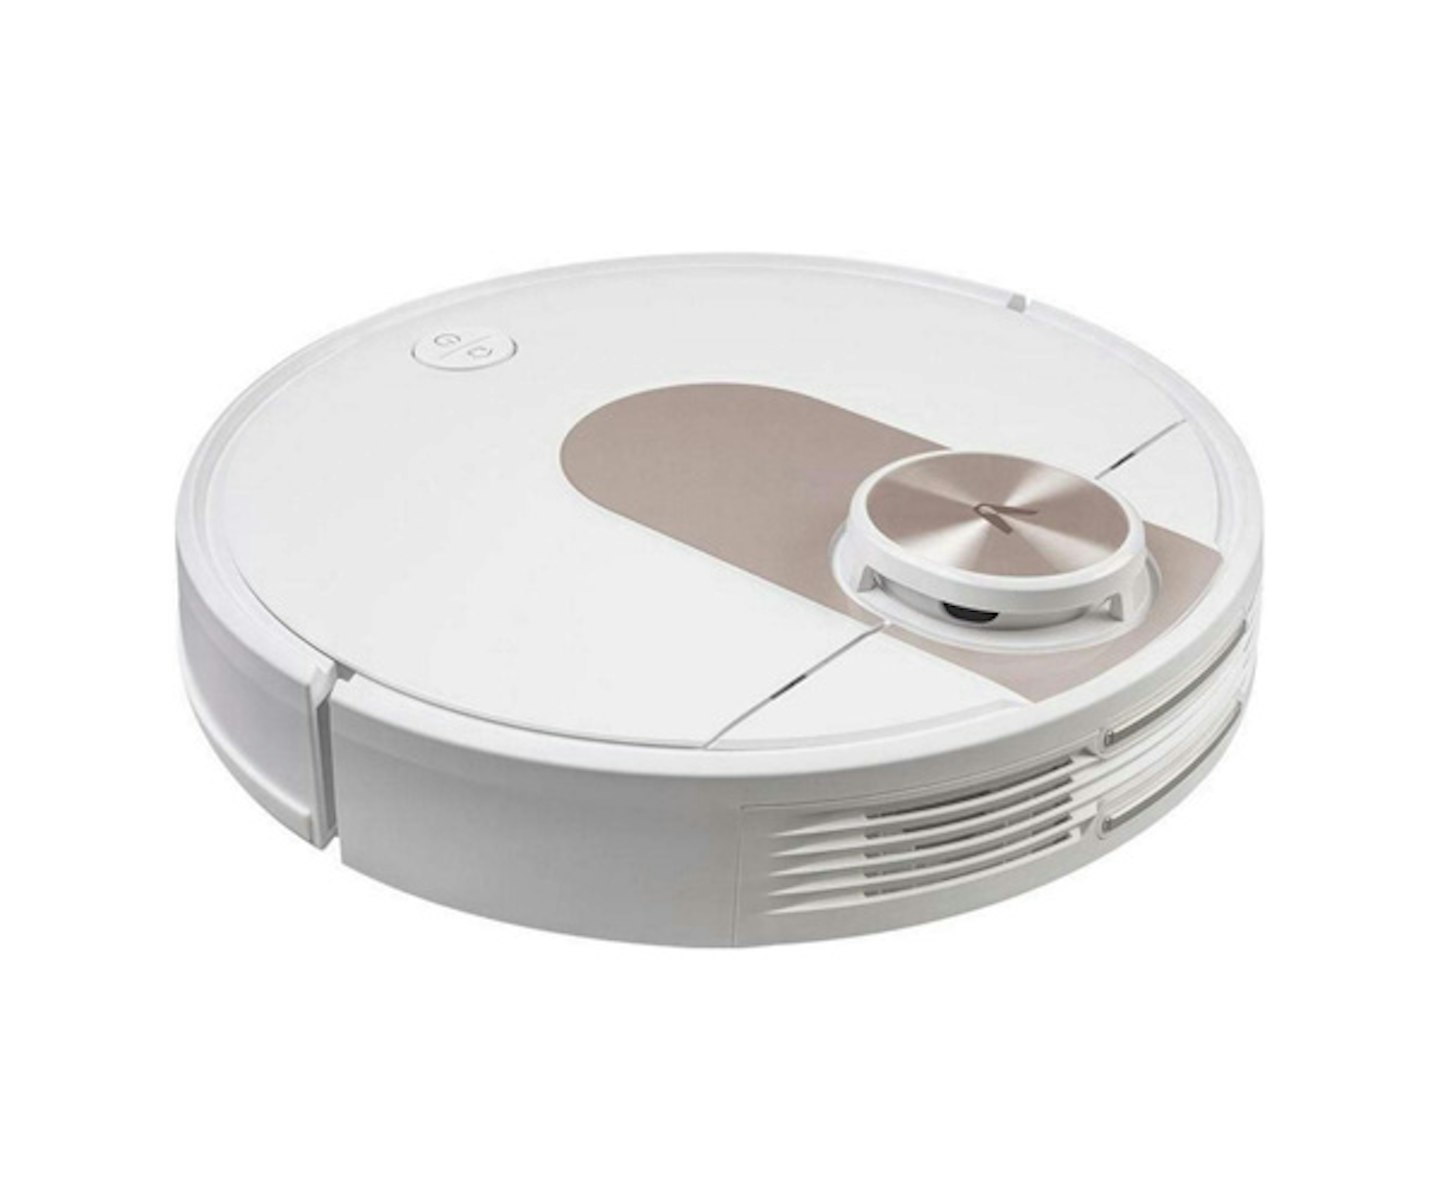 Viomi SE 2200 PA Robot Vacuum Cleaner and Mop